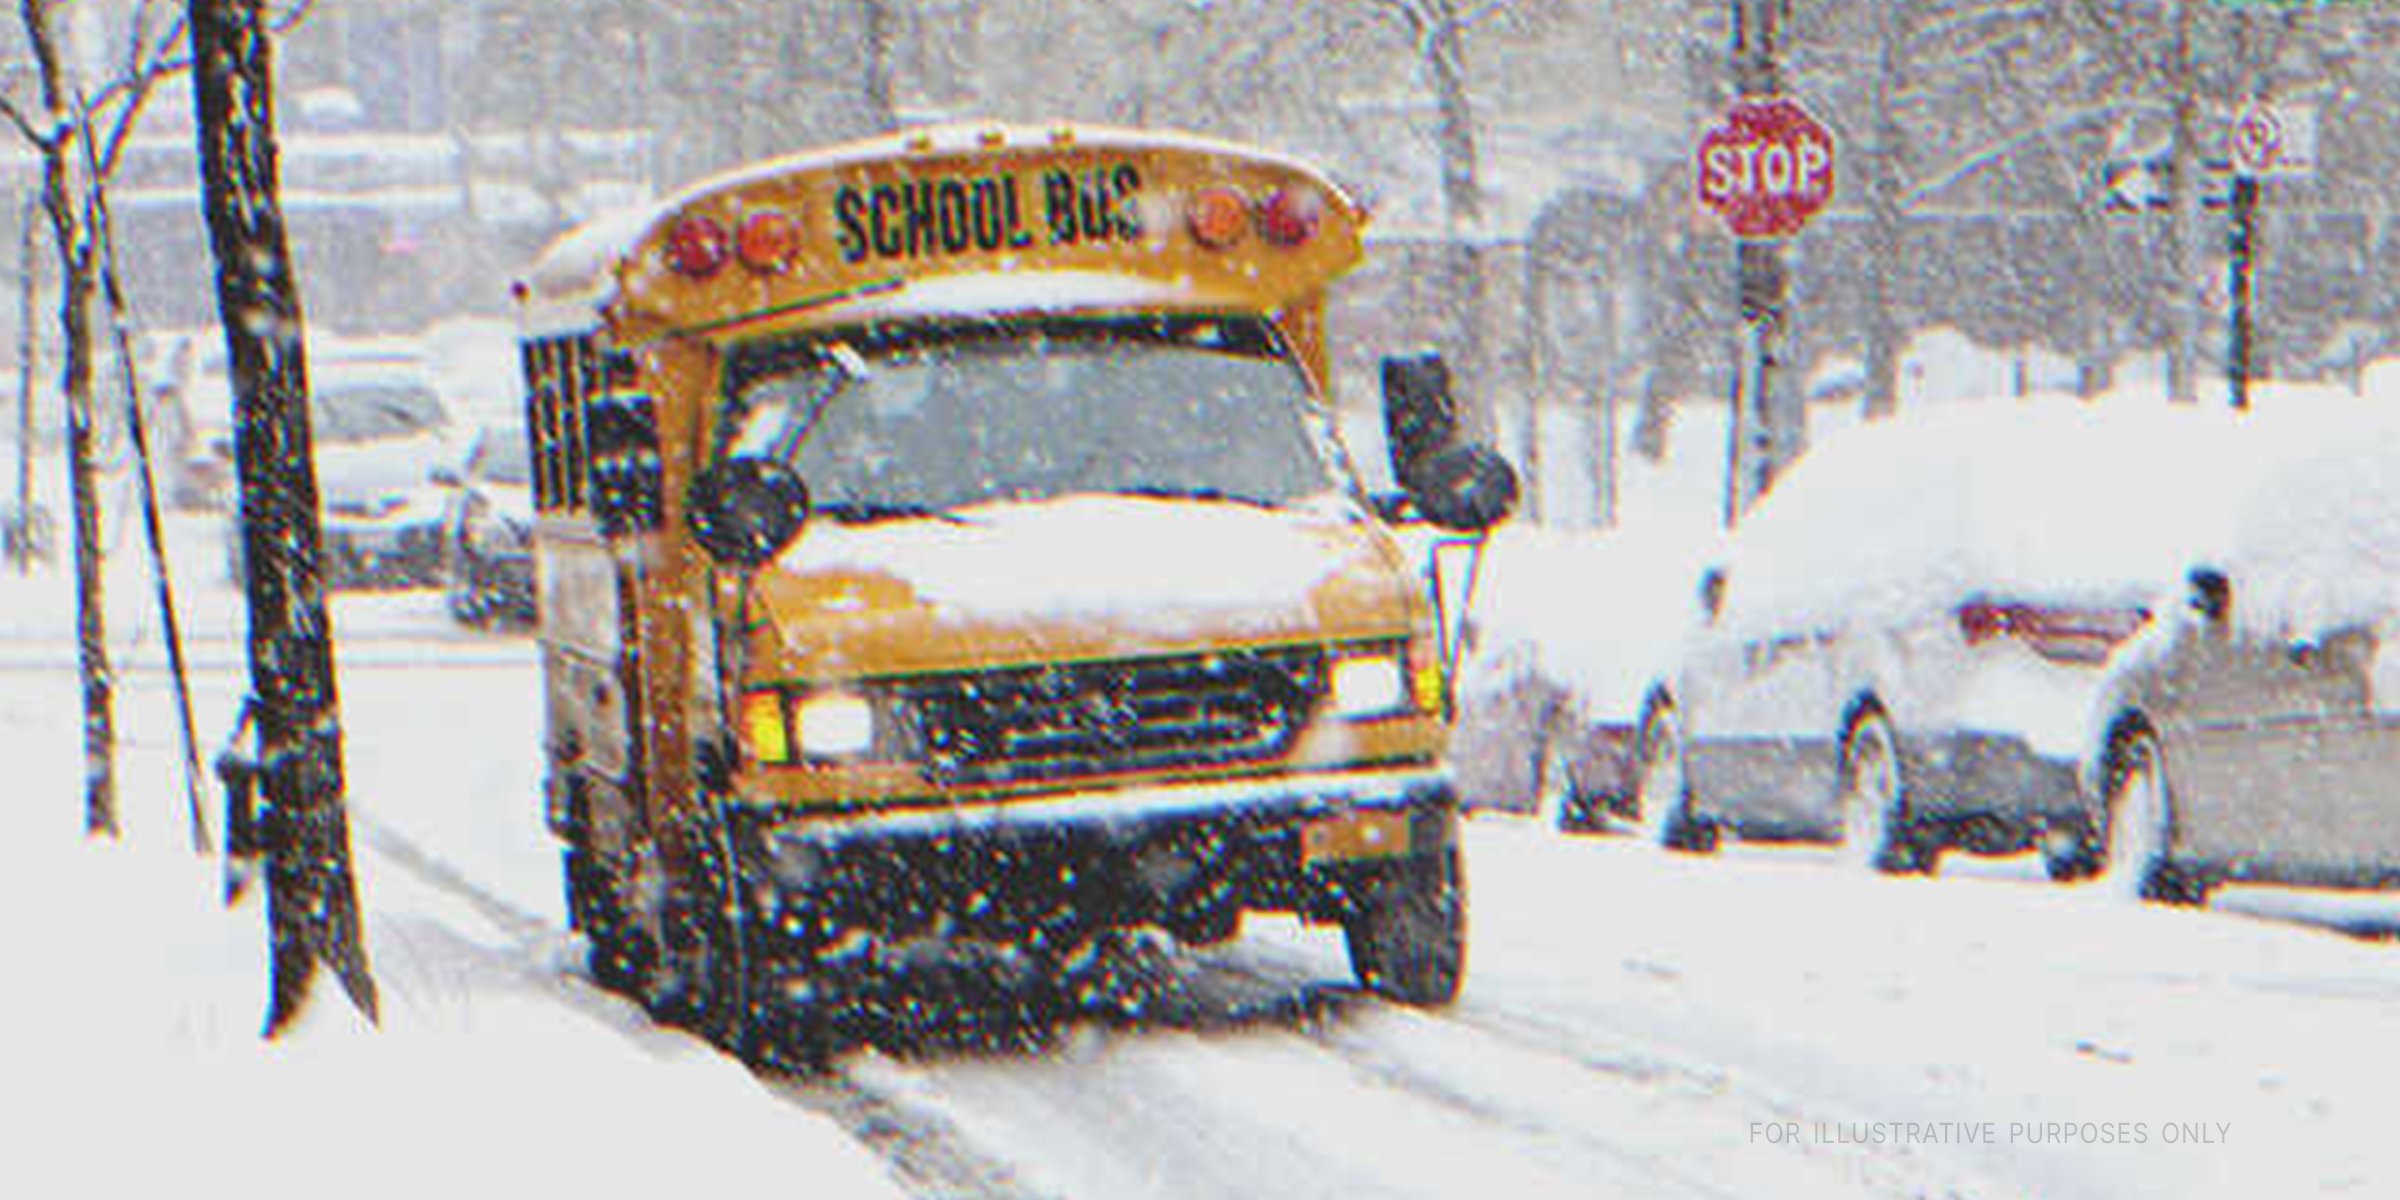 Bus Parked On The Road In Wintry Weather. | Source: Shutterstock